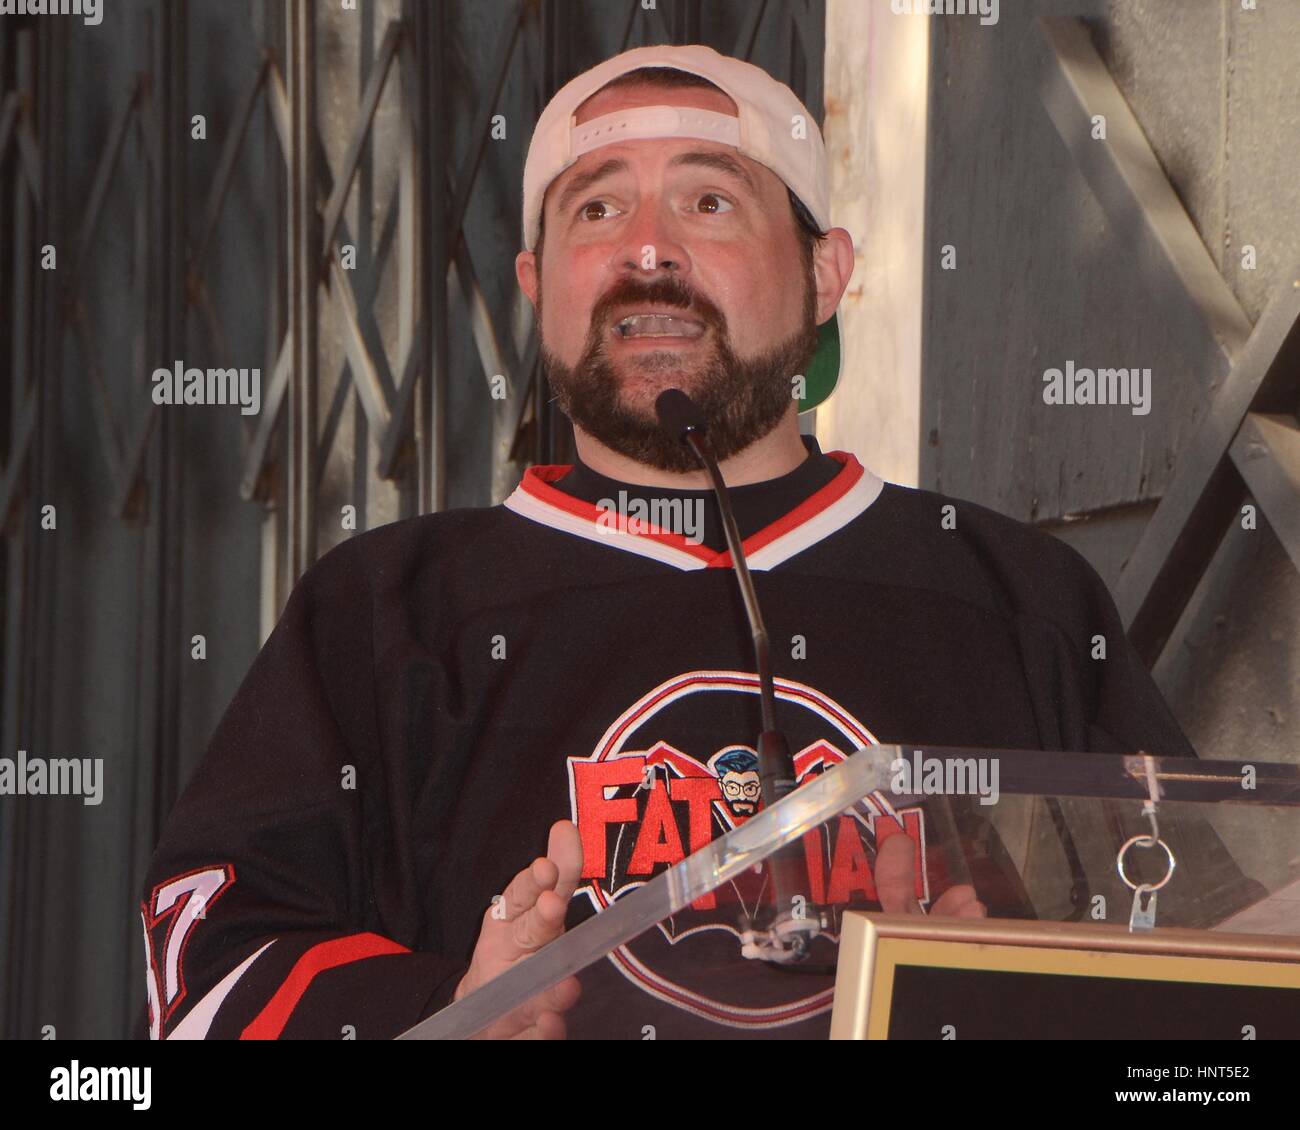 Los Angeles, CA, USA. 14th Feb, 2017. Kevin Smith at the induction ceremony for Star on the Hollywood Walk of Fame for George Segal, Hollywood Boulevard, Los Angeles, CA February 14, 2017. Credit: Priscilla Grant/Everett Collection/Alamy Live News Stock Photo